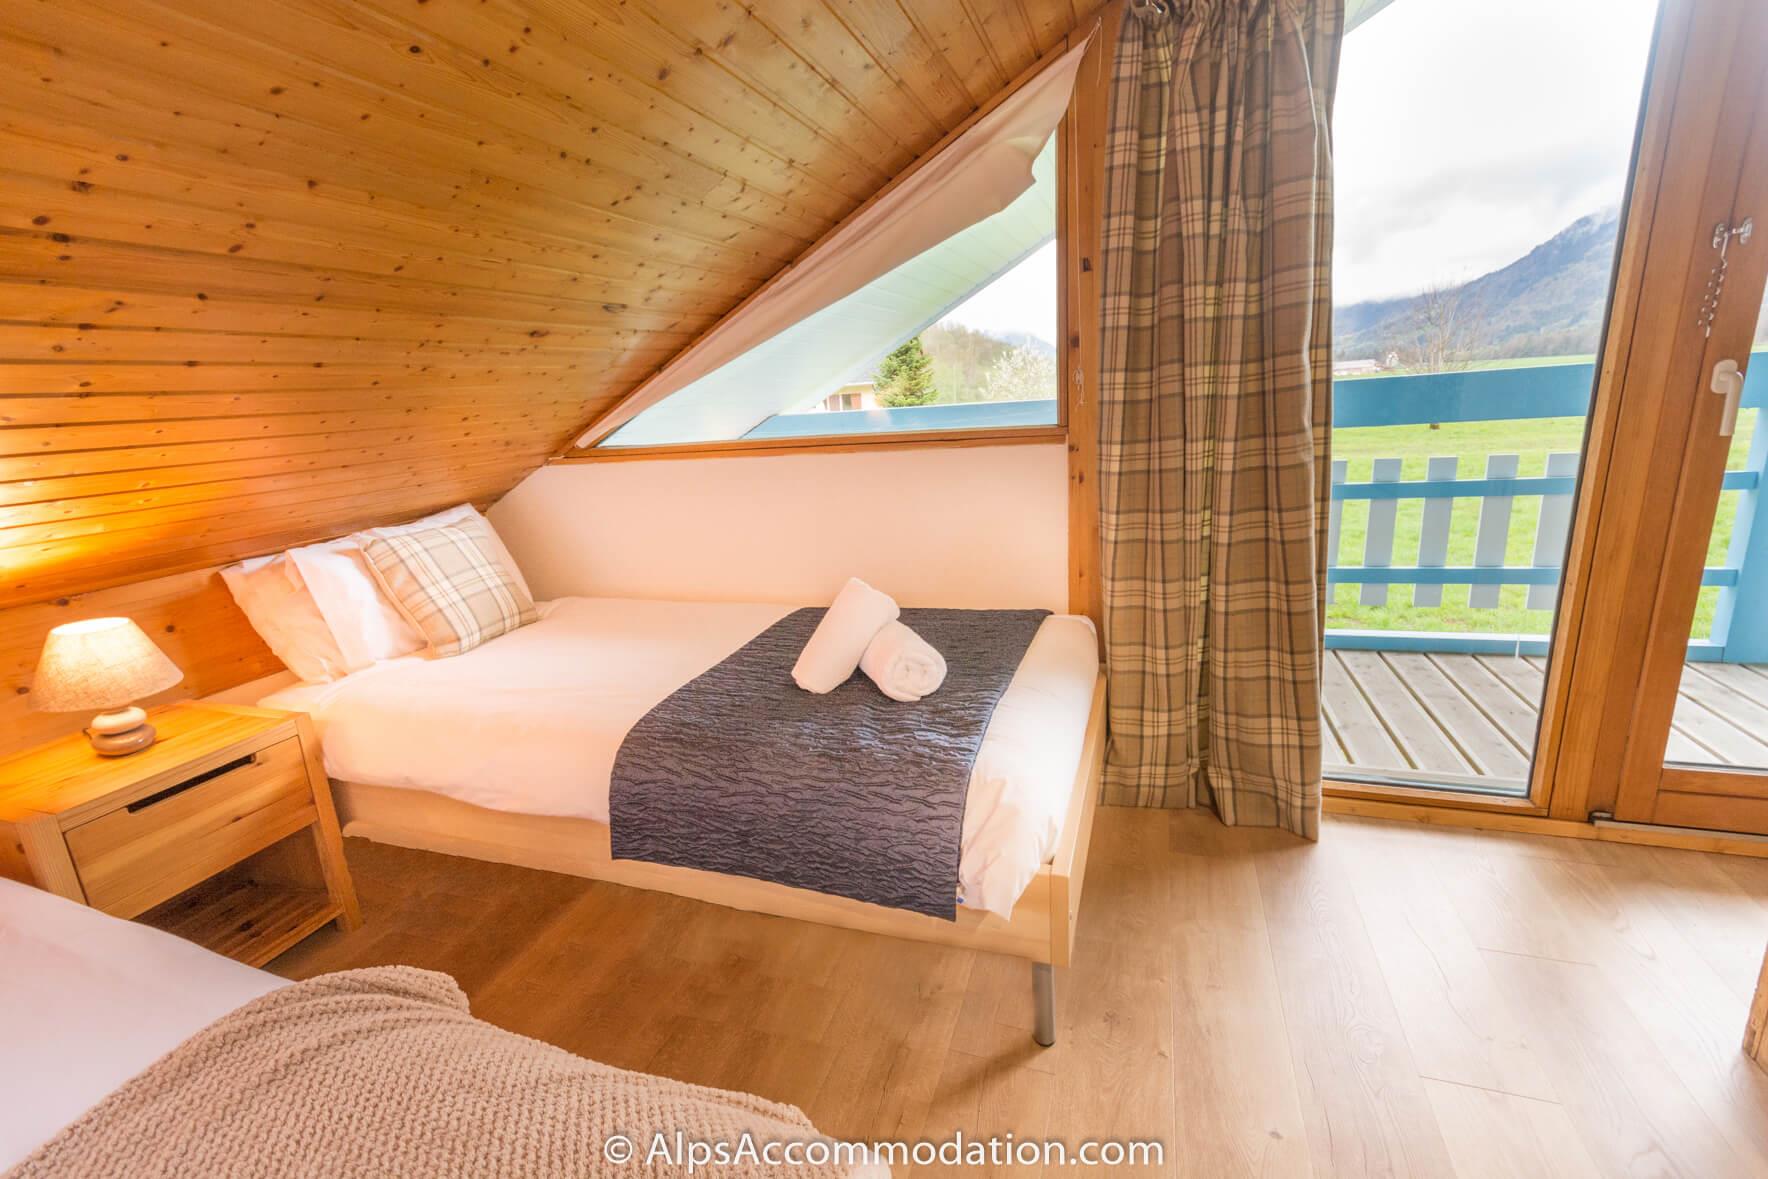 Chalet Bleu Morillon - More wonderful views from the triple bedroom